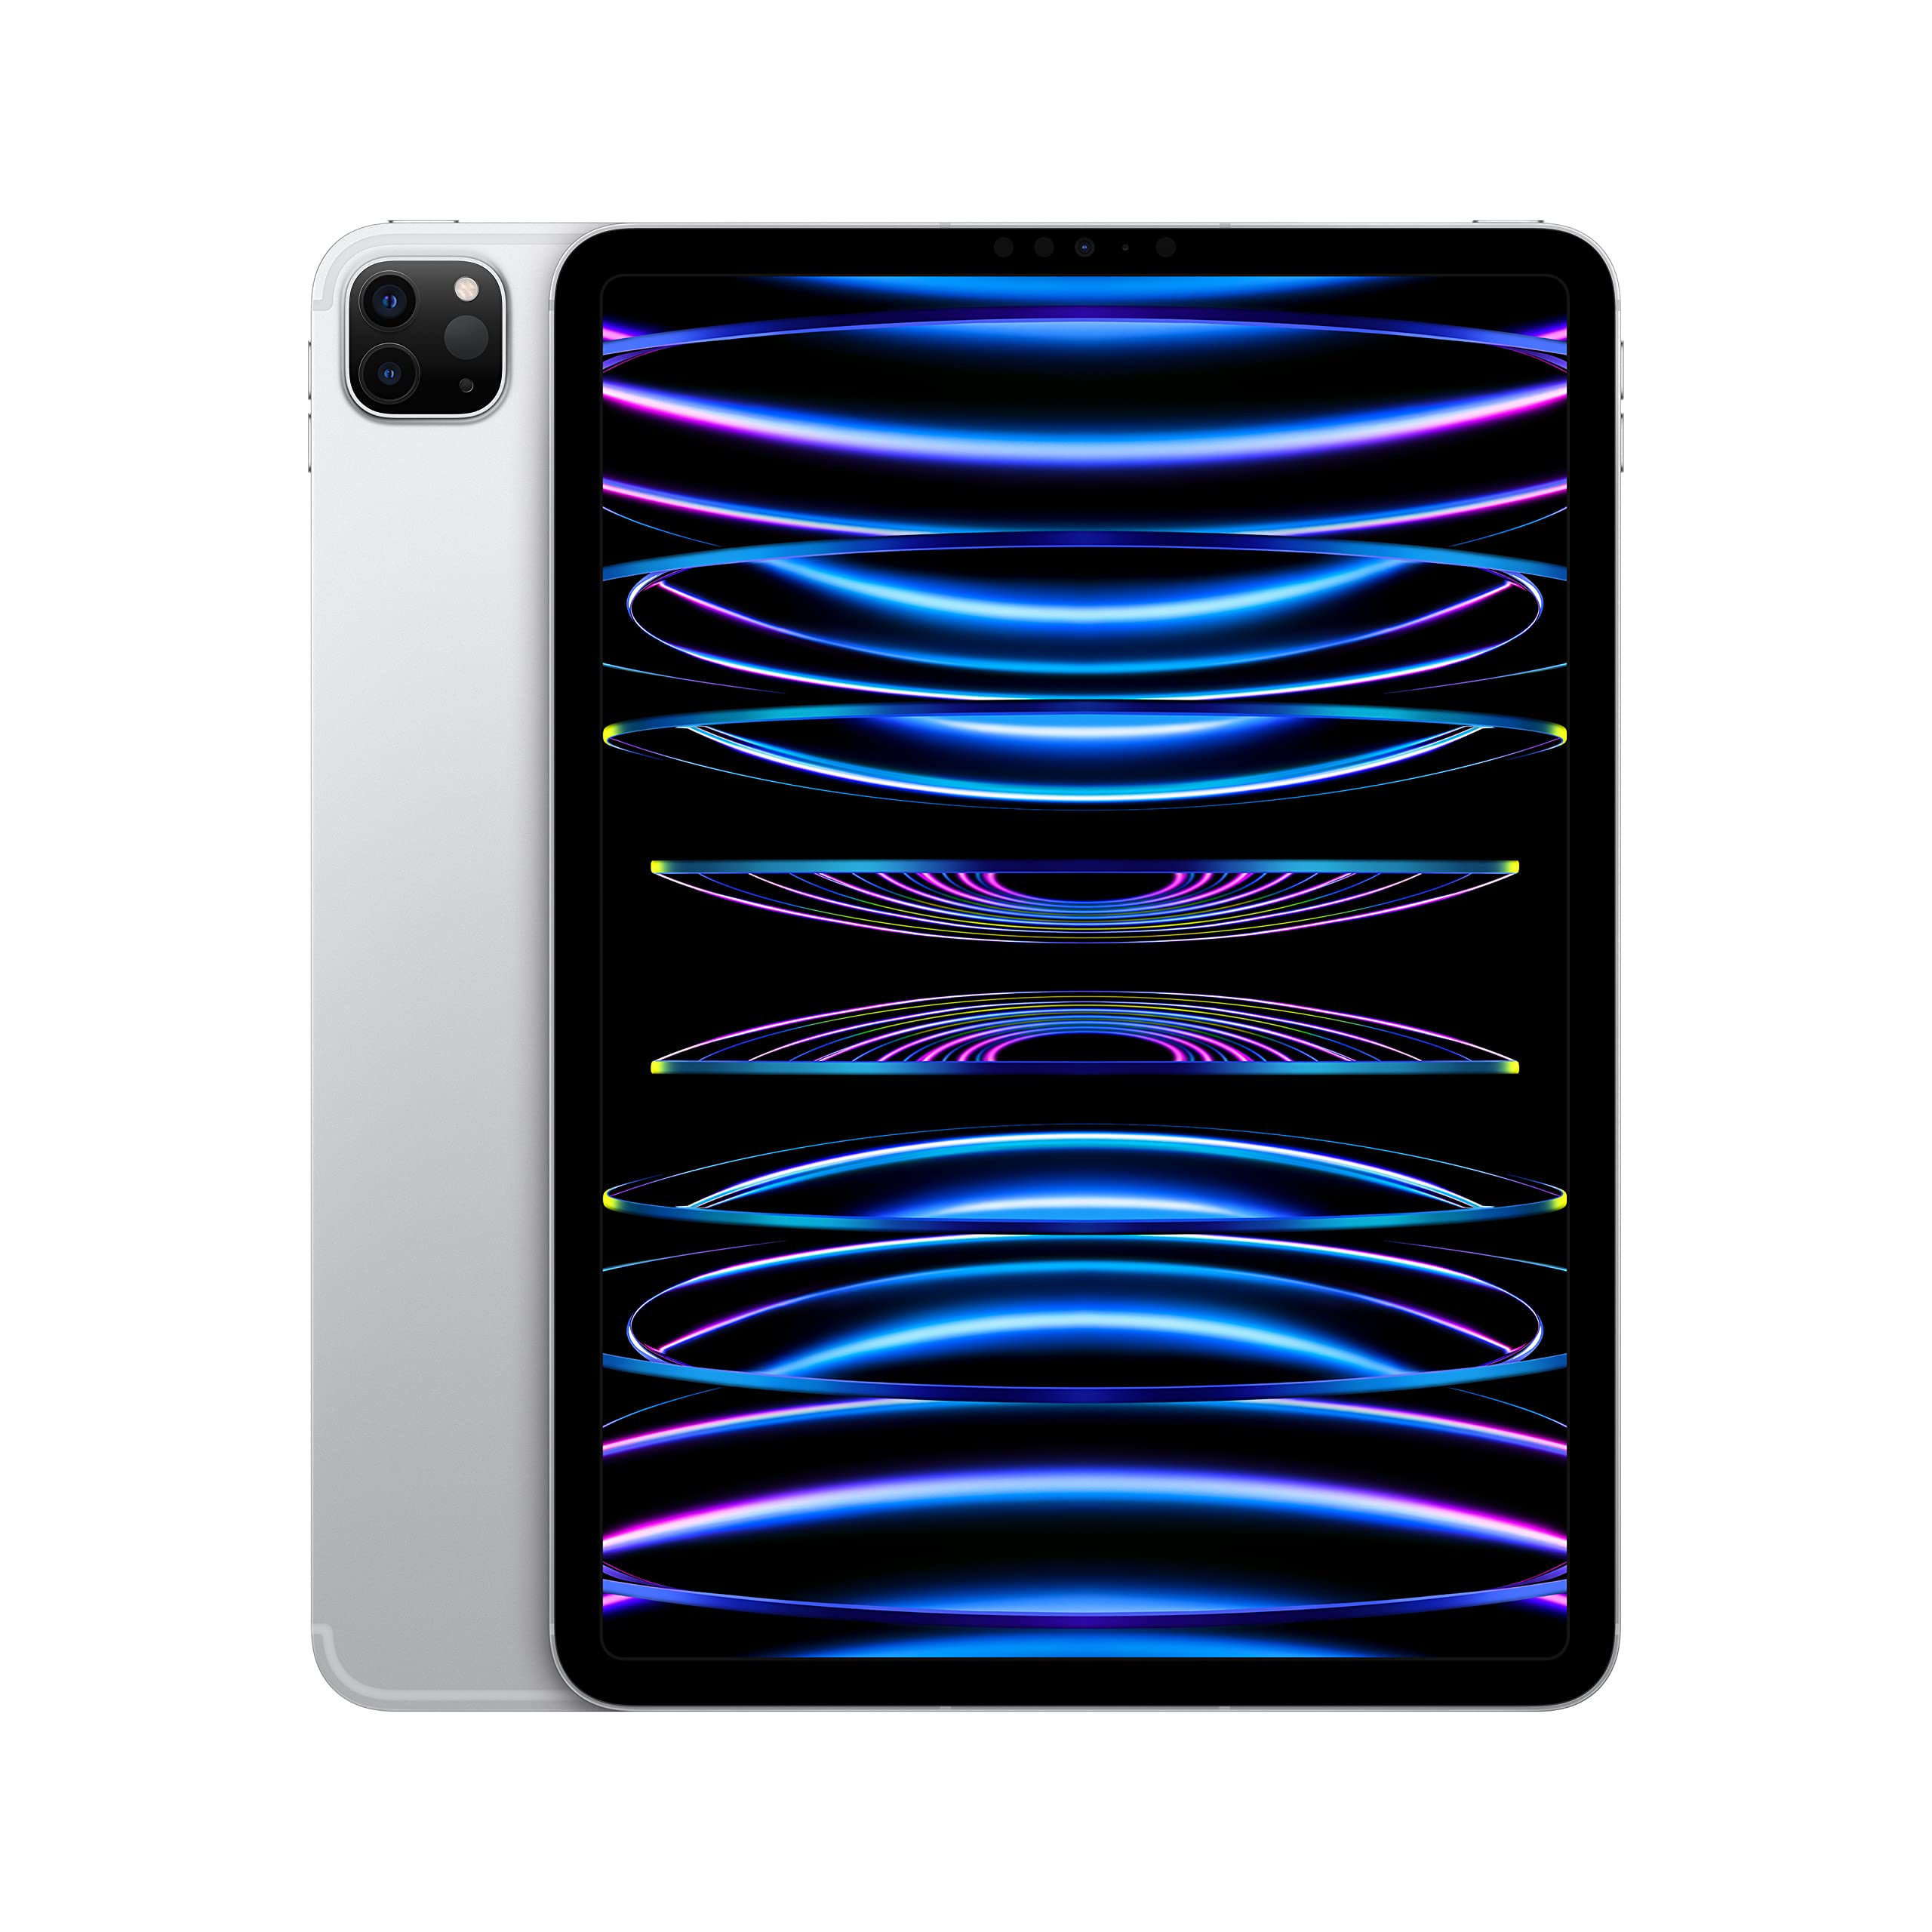 Apple iPad Pro 11-inch (4th Generation): with M2 chip, Liquid Retina Display, 256GB, Wi-Fi 6E + 5G Cellular, 12MP front/12MP and 10MP Back Cameras, Face ID, All-Day Battery Life – Silver